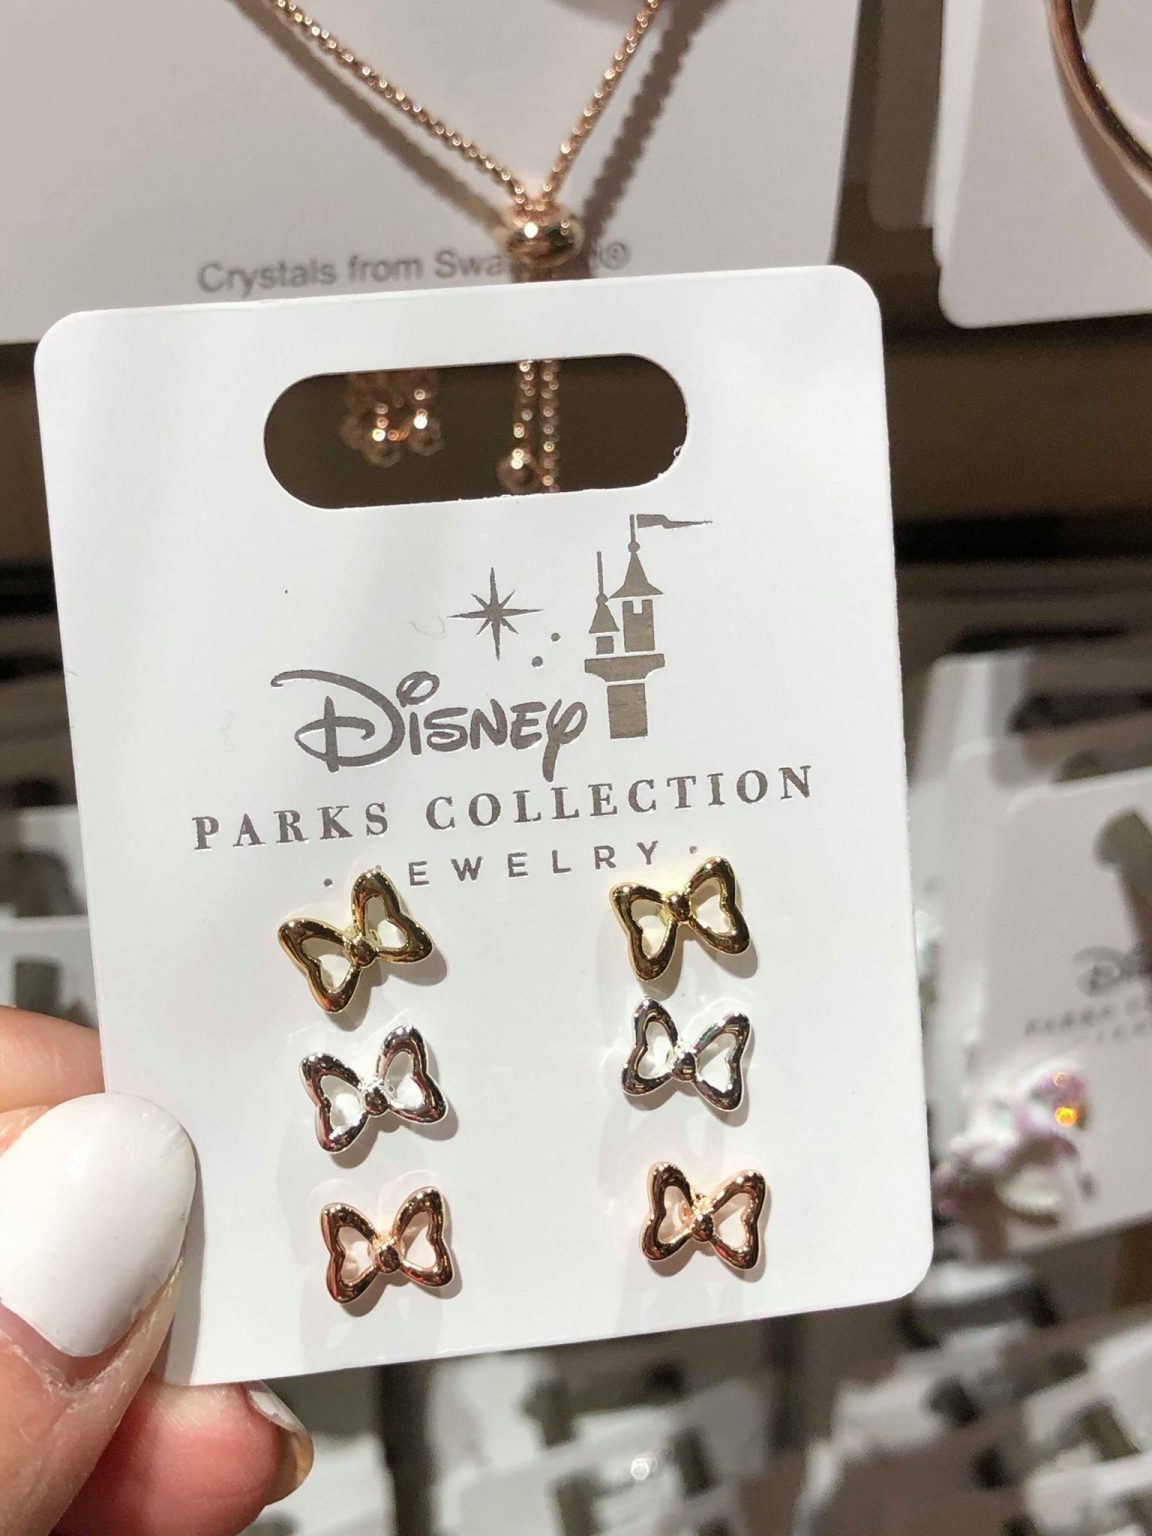 This New Rose Gold Disney Parks Collection Jewelry Is Stunning ...